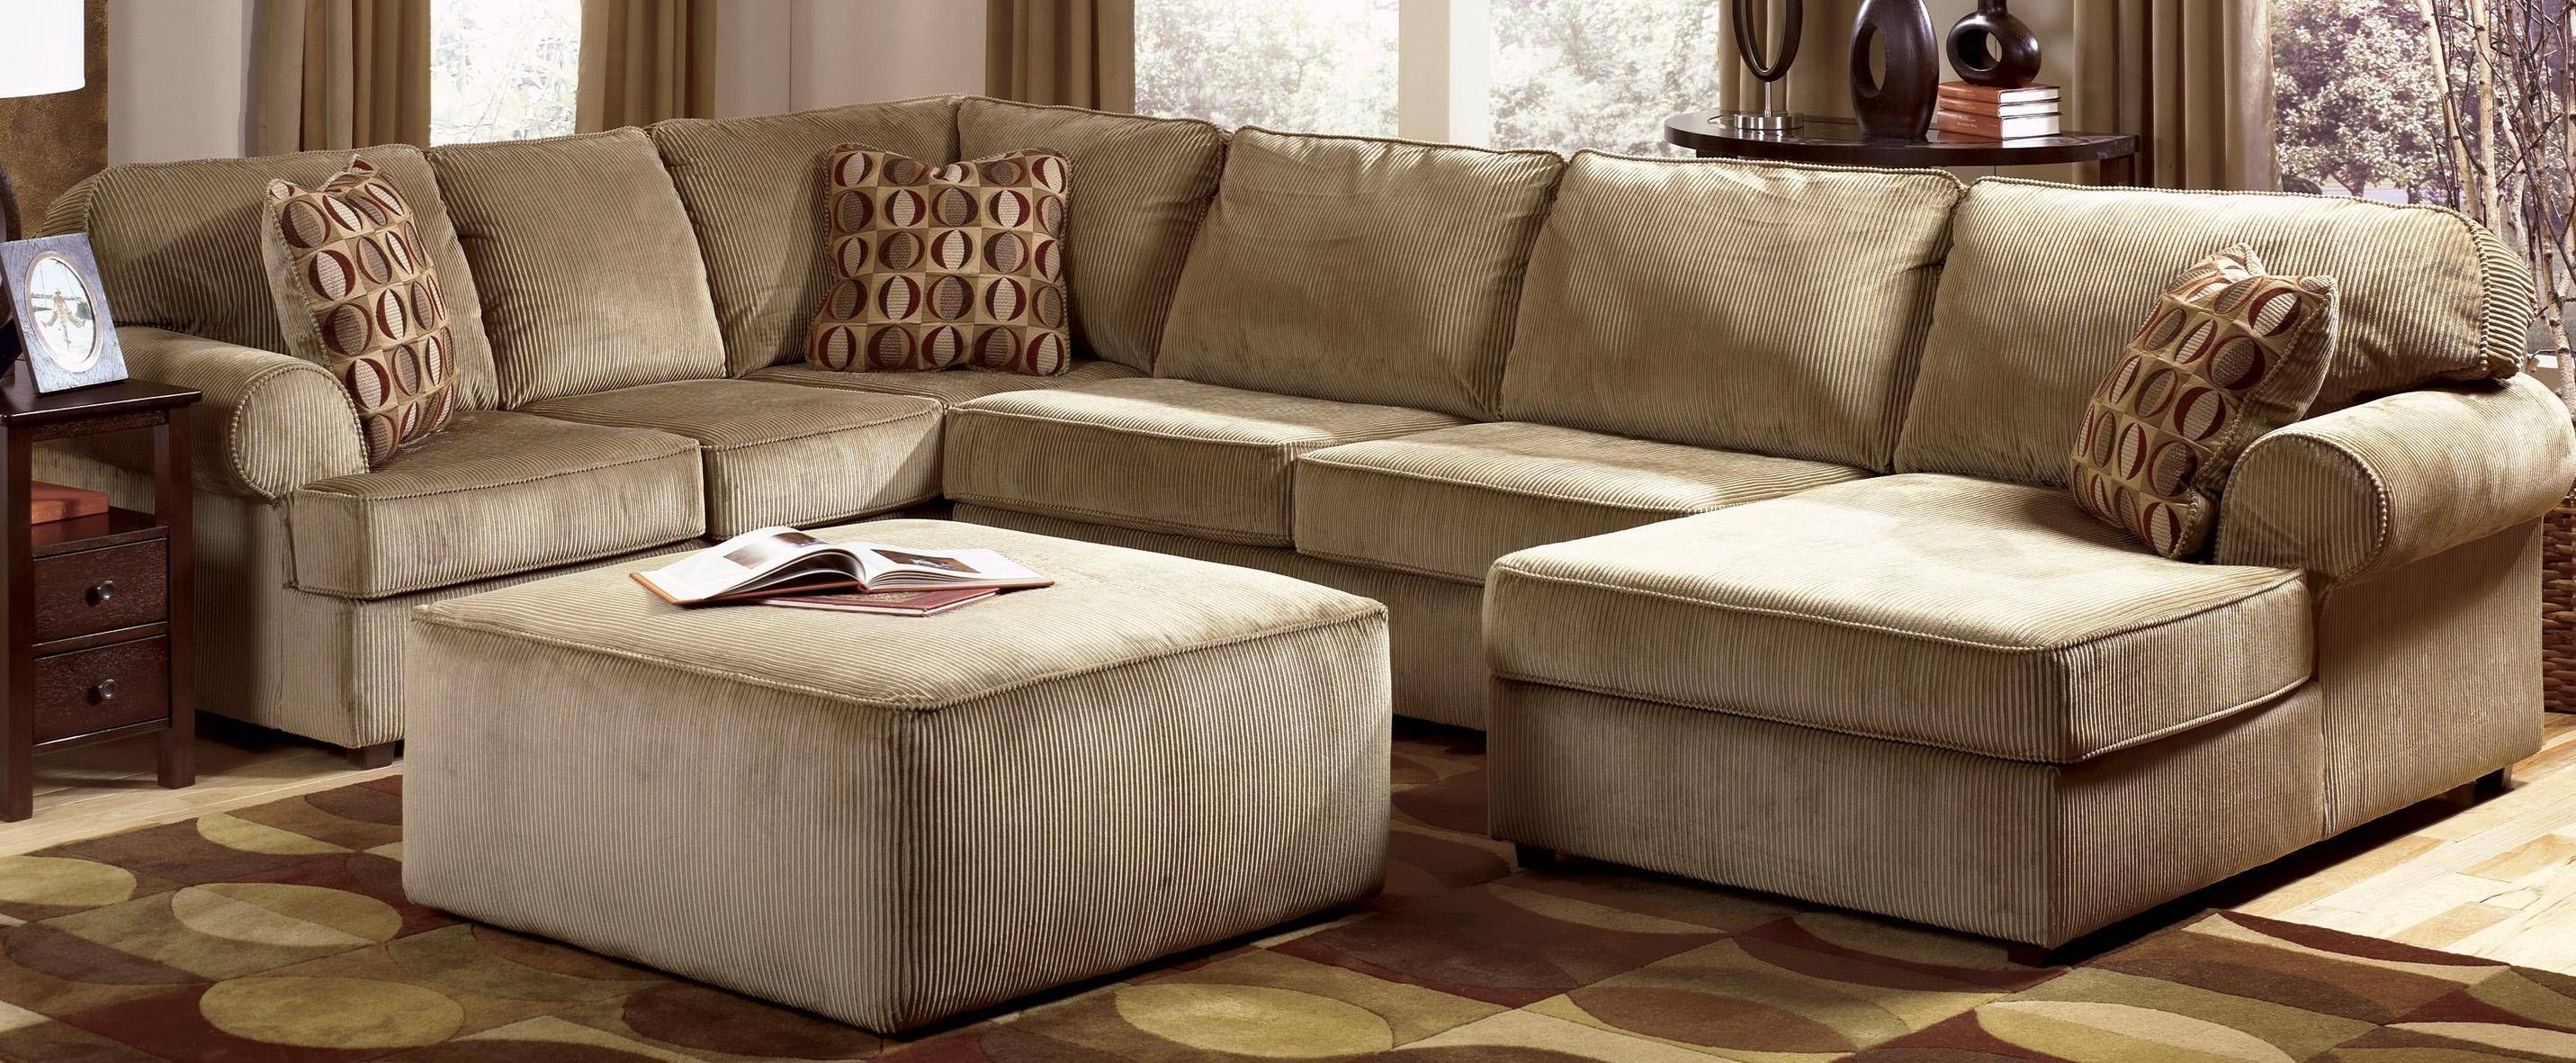 15 Best Ideas of Ashley Furniture Corduroy Sectional Sofas